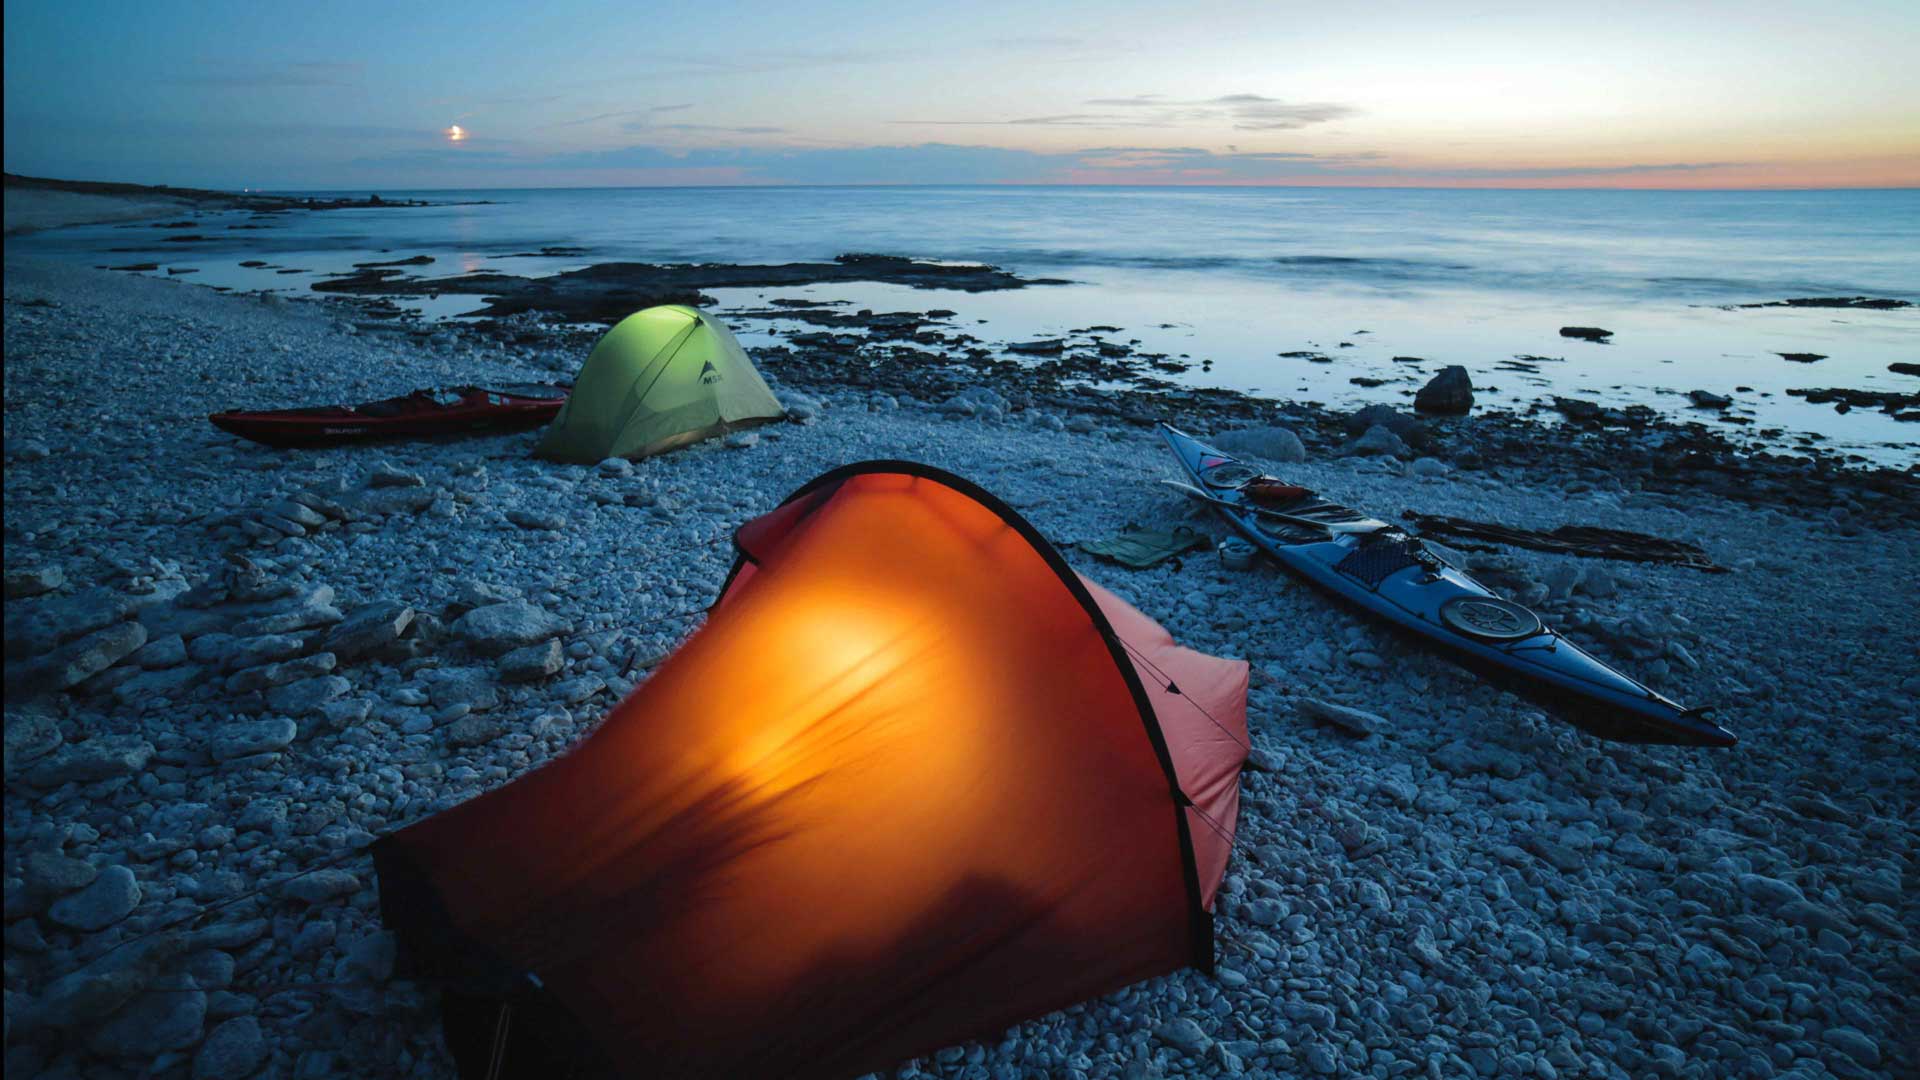 Orange tent in the sunset on a rocky beach.